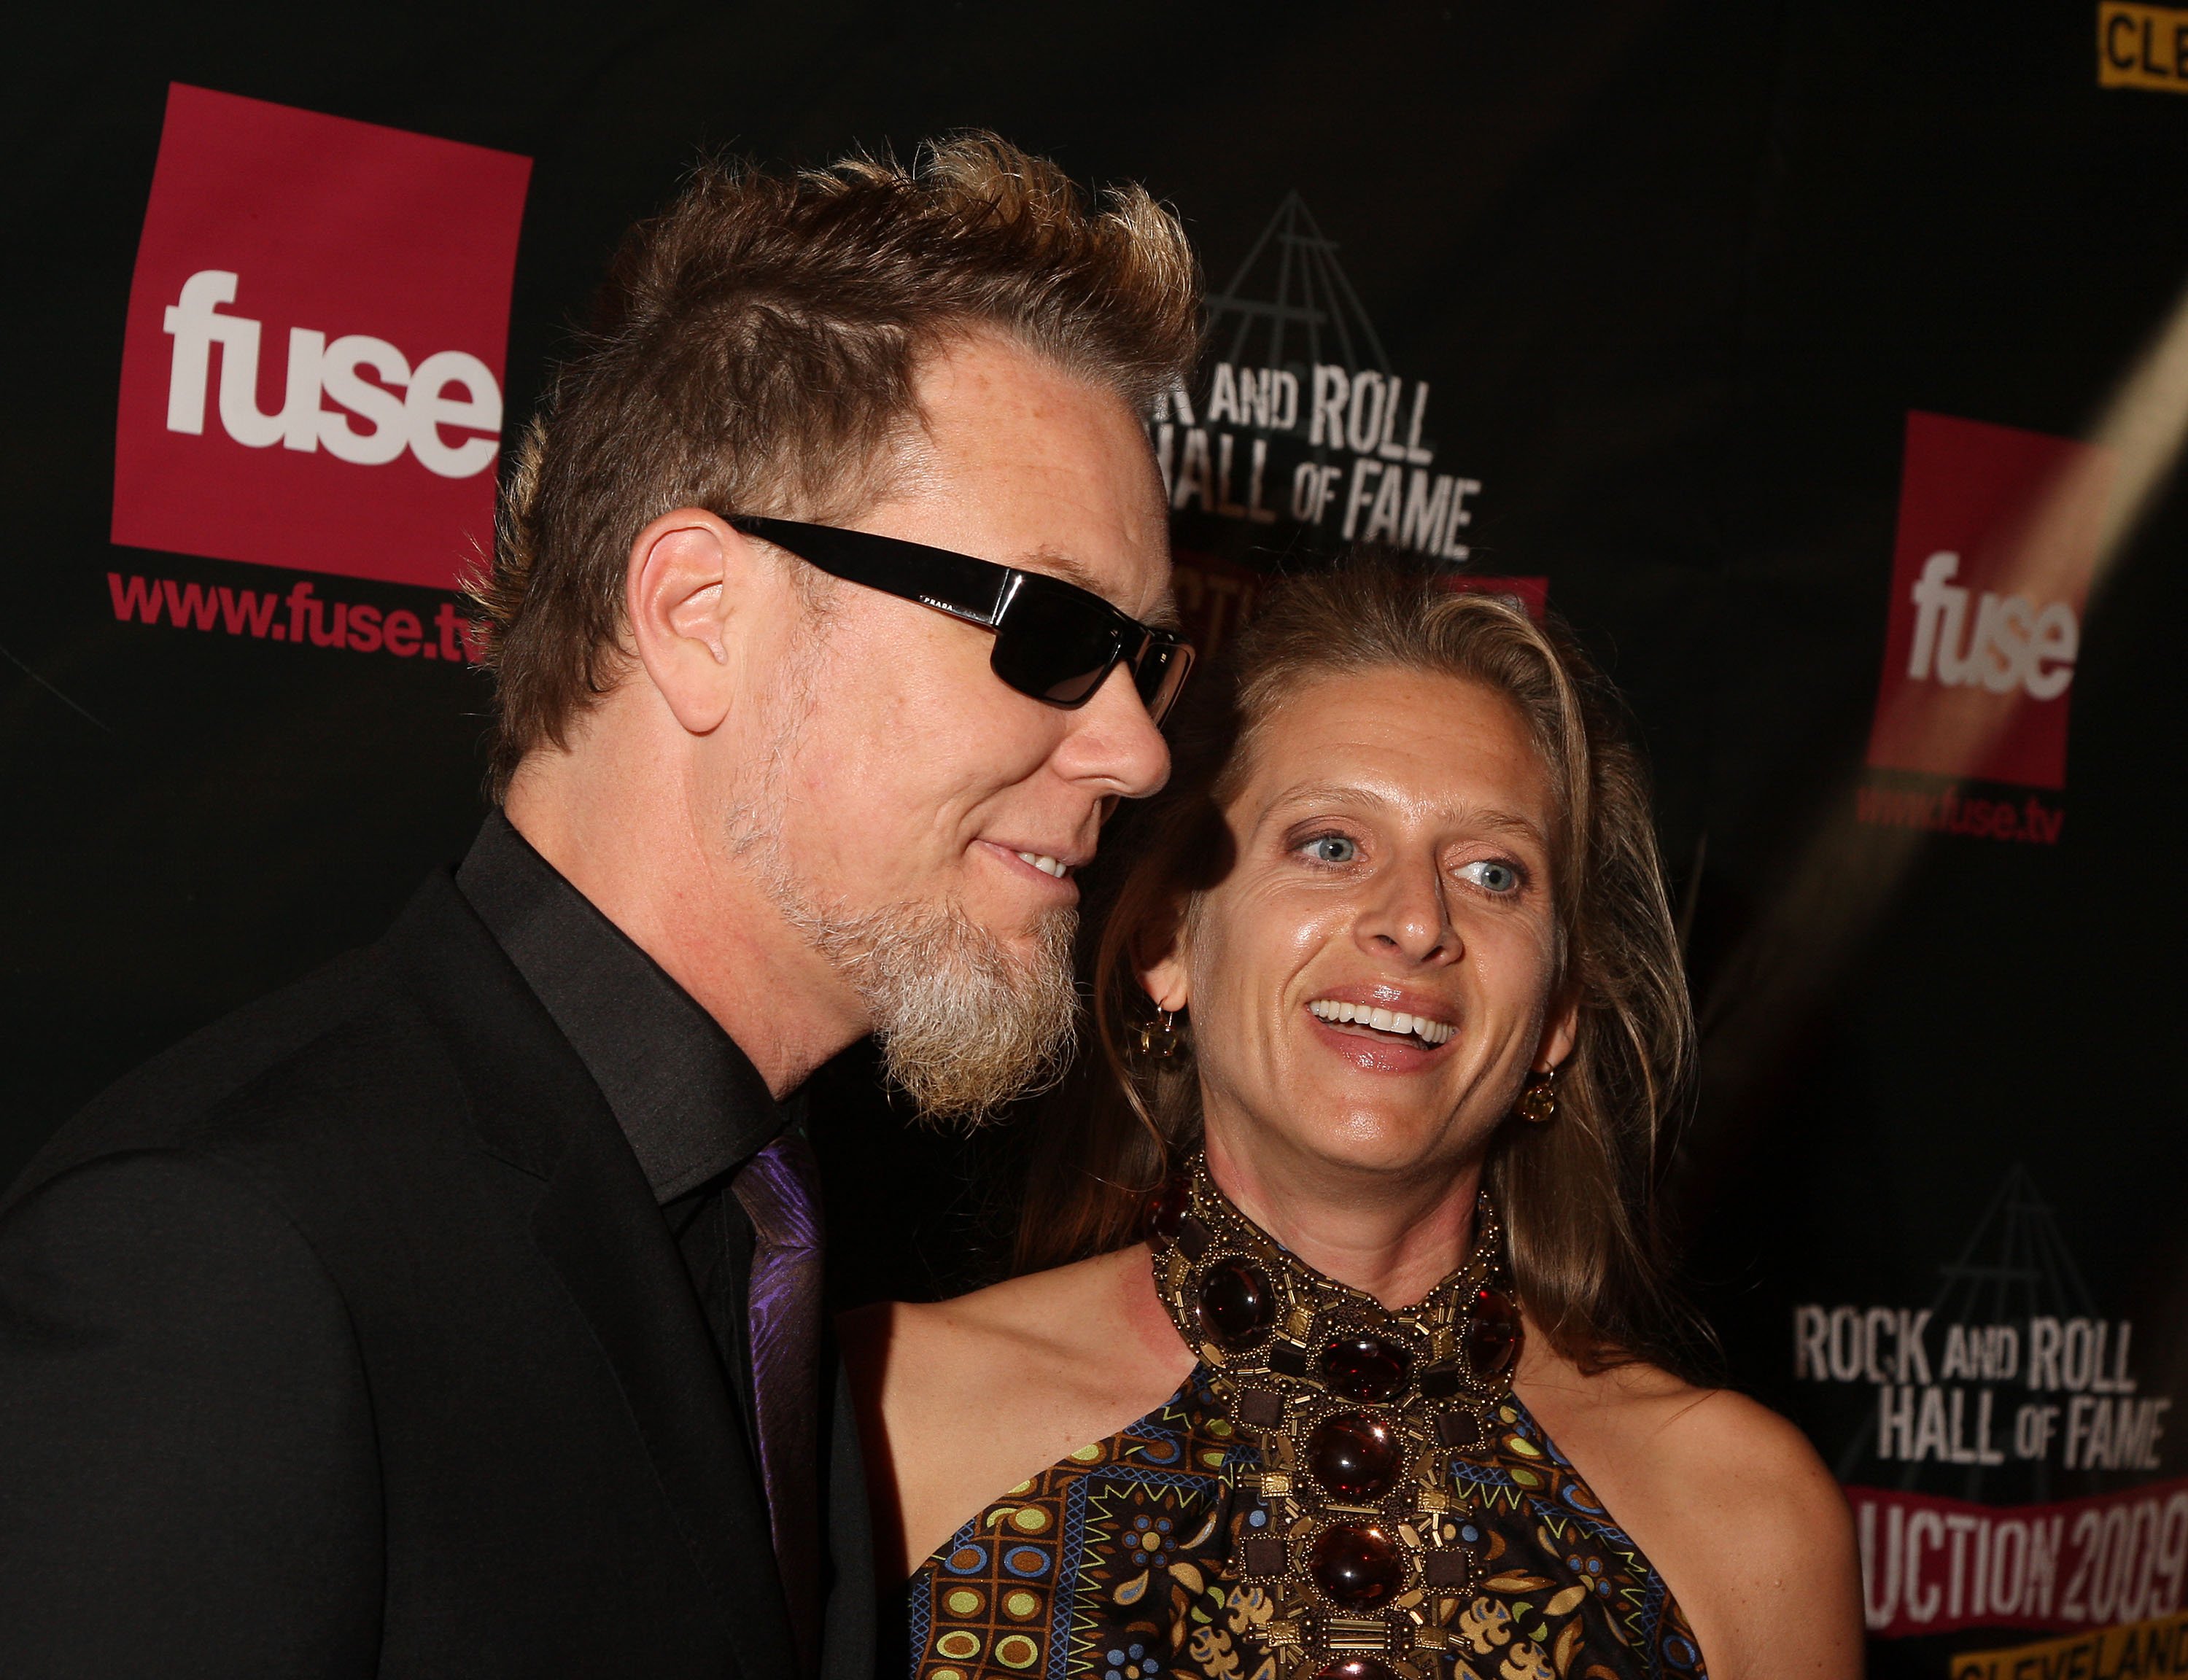 James Hetfield and his wife Francesca Hetfield attend the 24th Annual Rock and Roll Hall of Fame Induction Ceremony at Public Hall on April 4, 2009, in Cleveland, Ohio. | Source: Getty Images